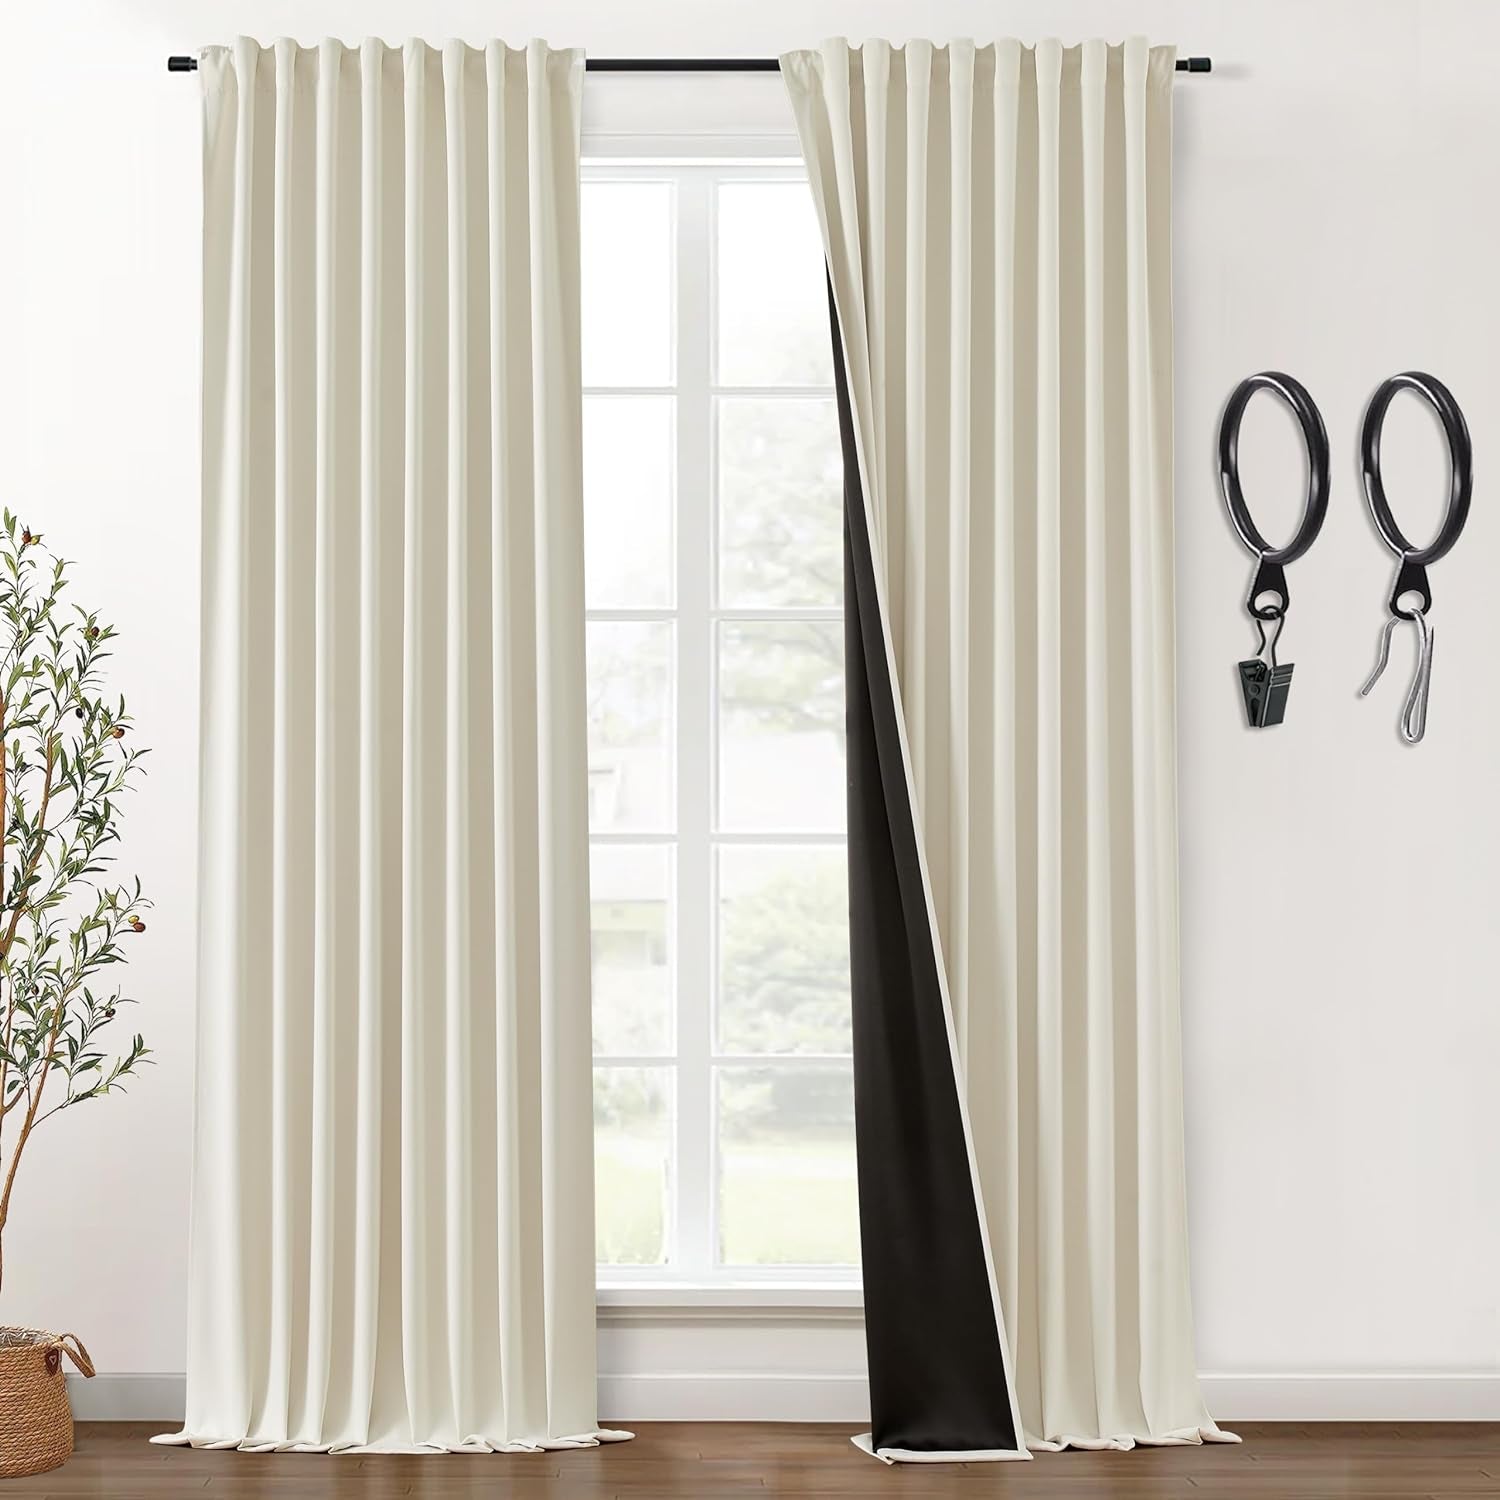 SHINELAND Beige Room Darkening Curtains 105 Inches Long for Living Room Bedroom,Cortinas Para Cuarto Bloqueador De Luz,Thermal Insulated Back Tab Pleat Blackout Curtains for Sunroom Patio Door Indoor  SHINELAND Beige 2X(52"Wx96"L) 